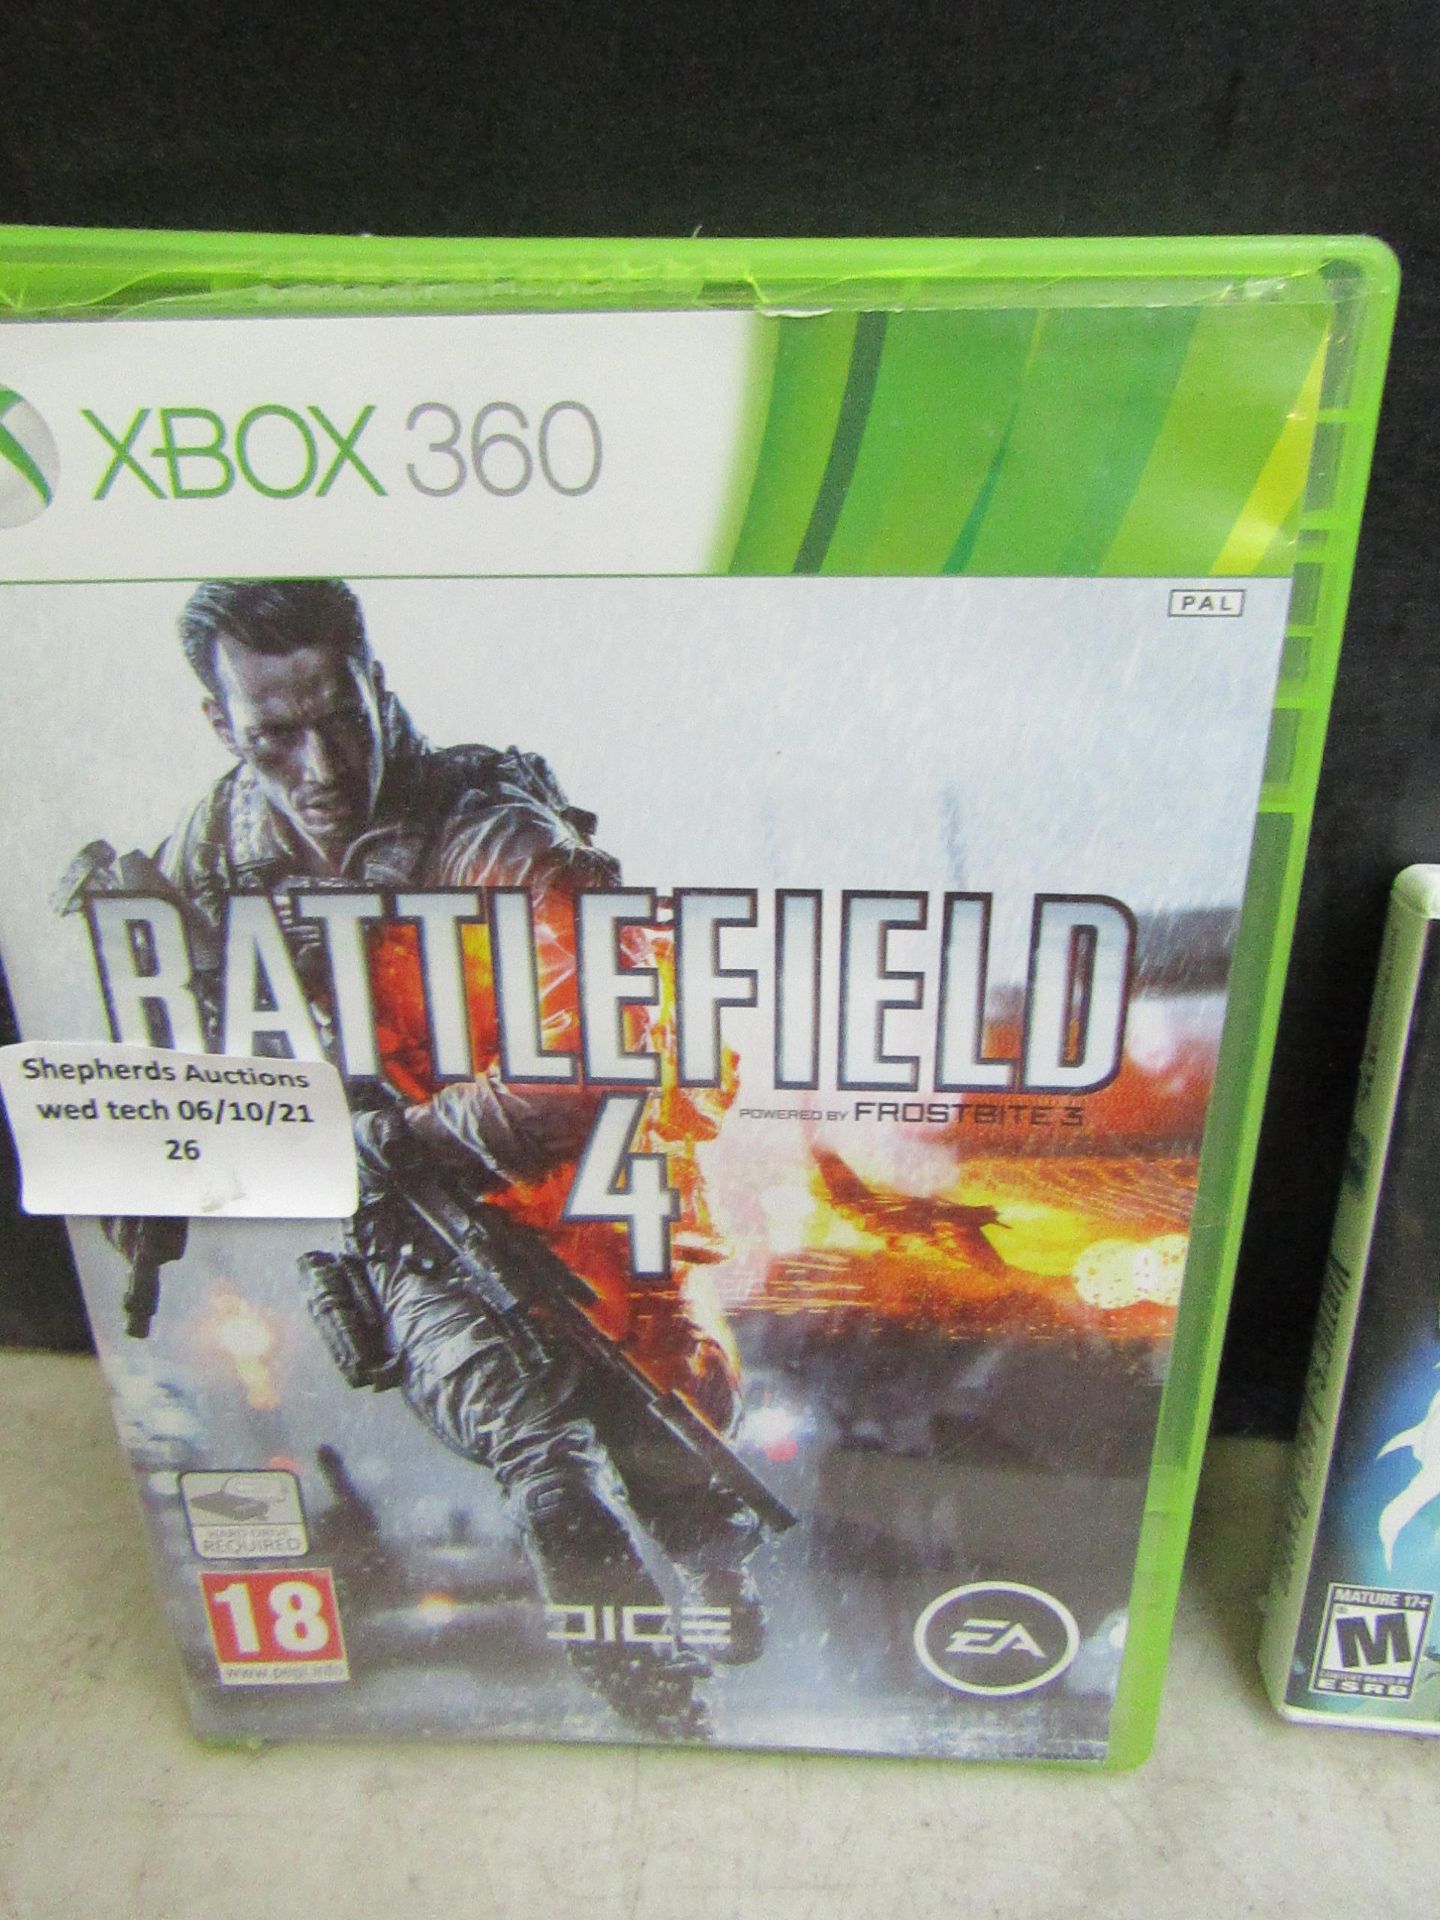 Battlefield 4 for Xbox 360, unchecked in packaging